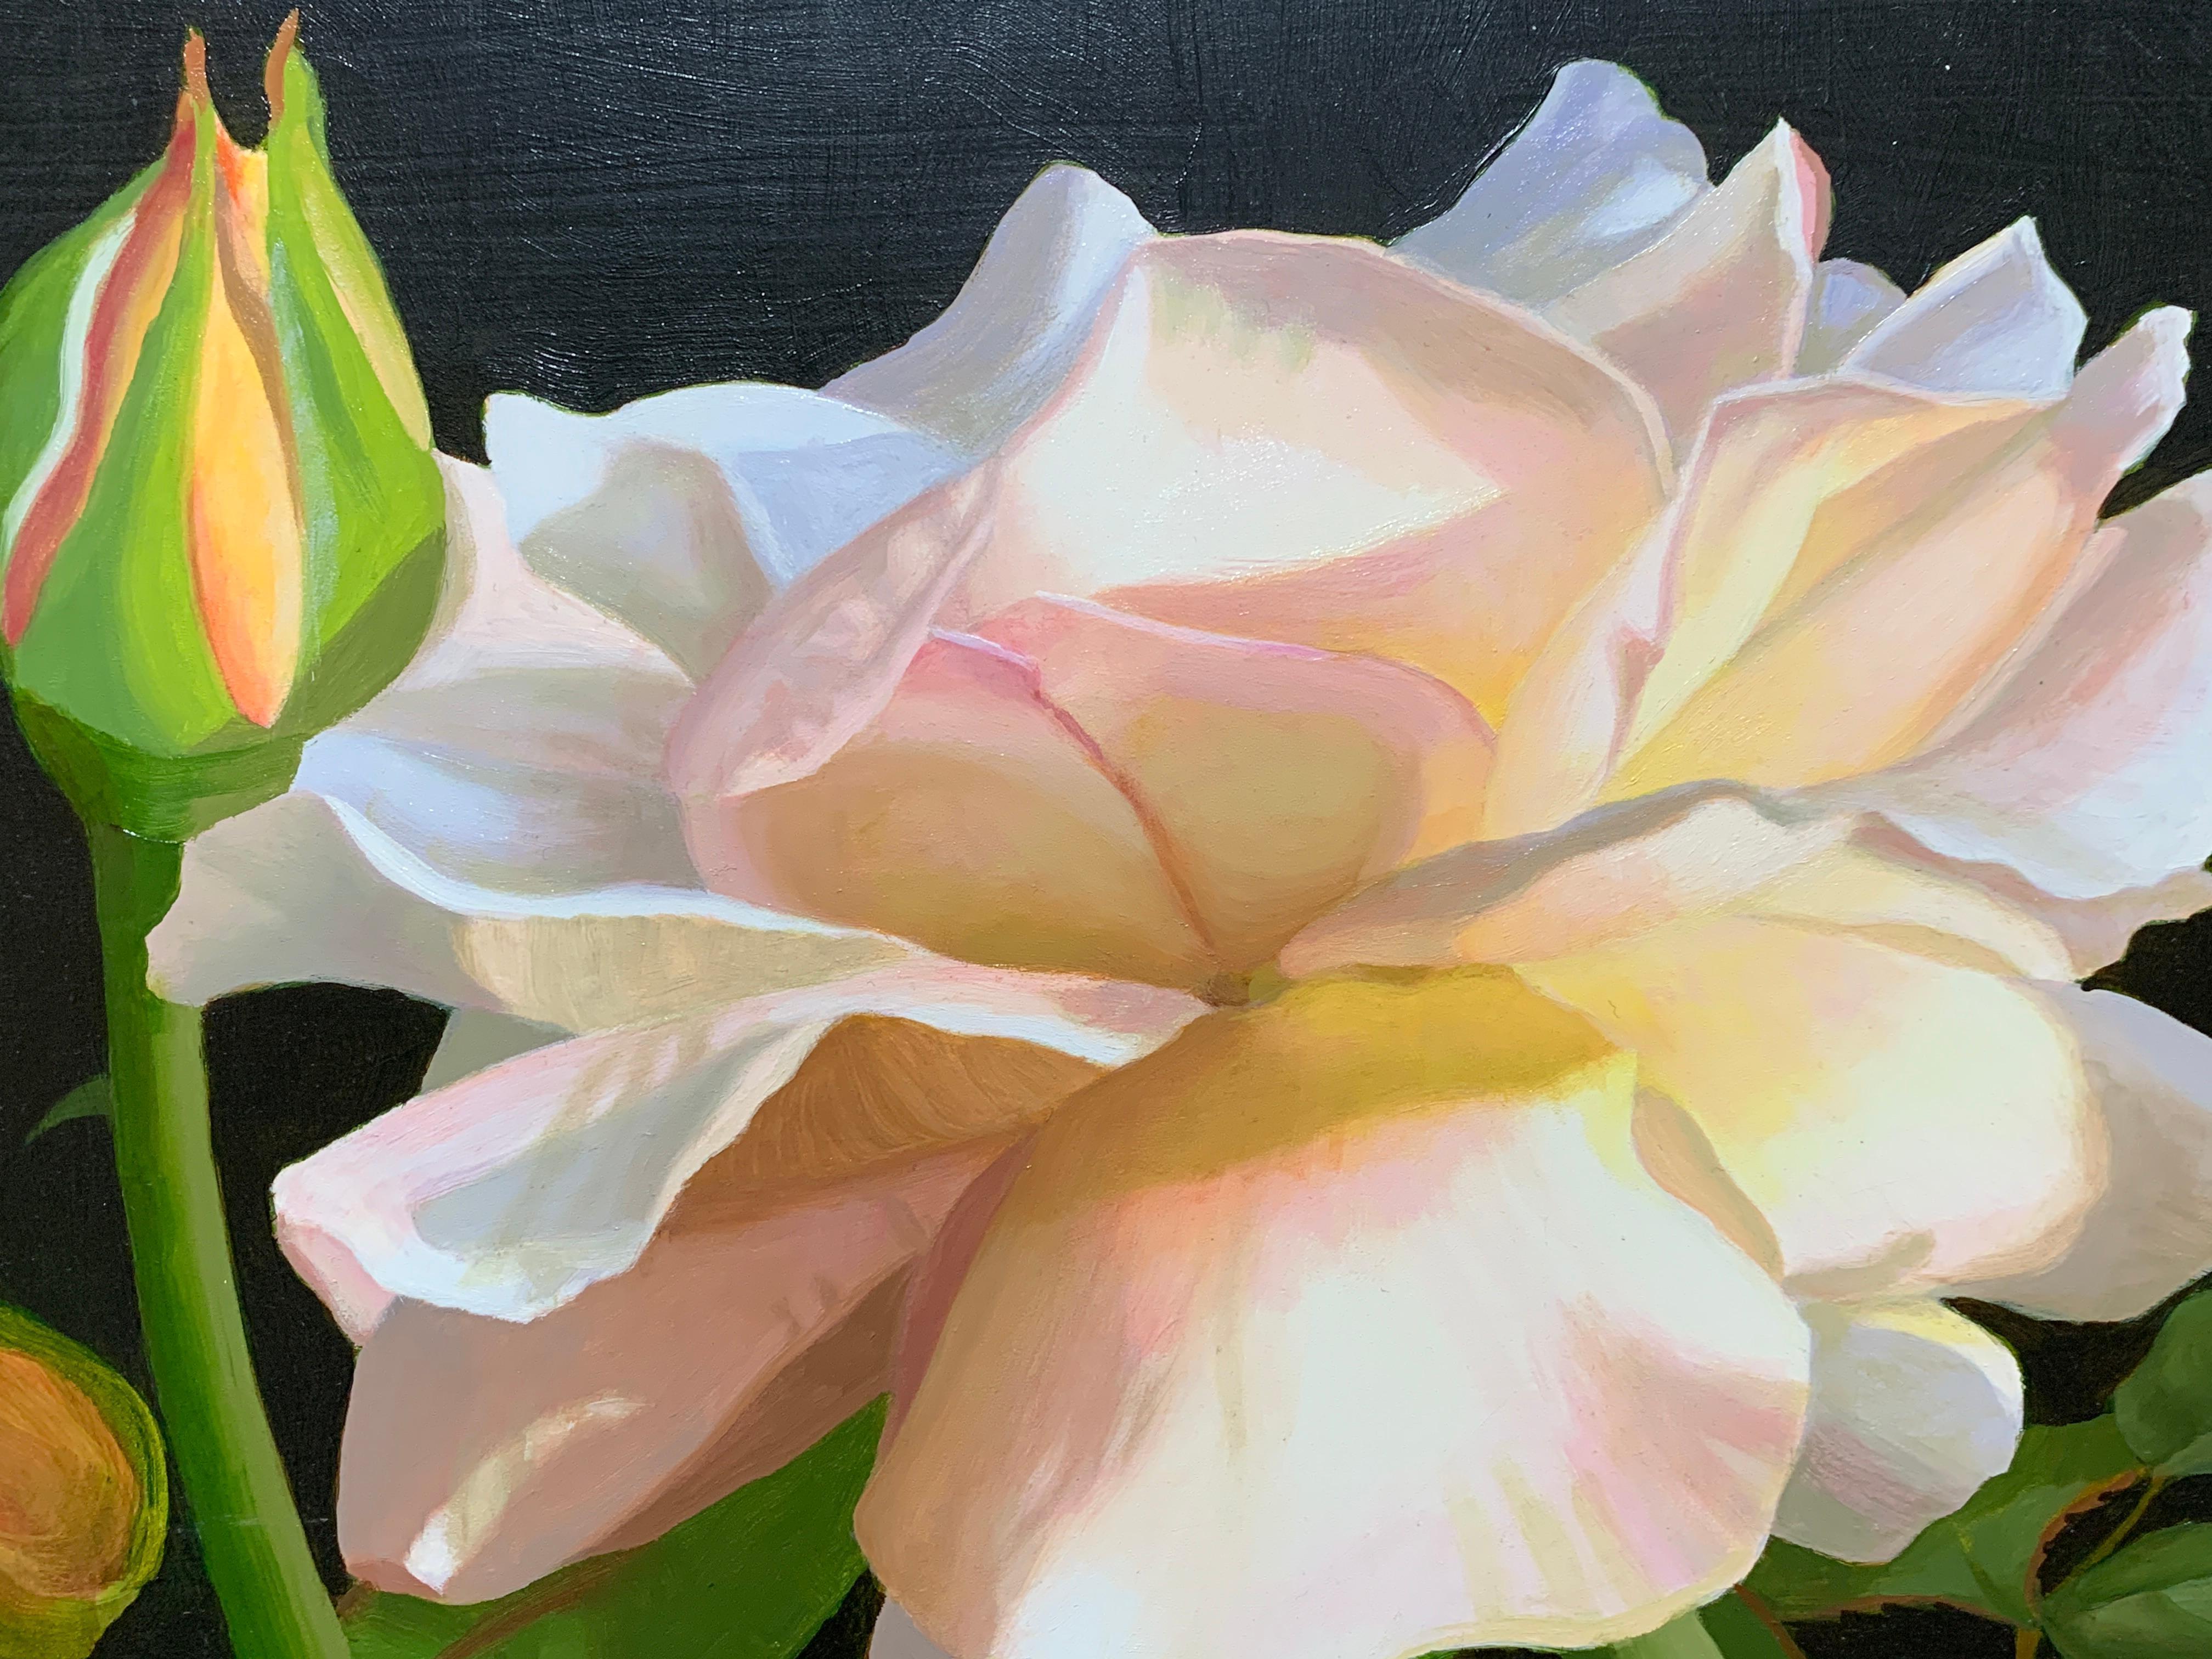 American Realist still life of Pink and Yellow Roses - Painting by Elizabeth Rickert